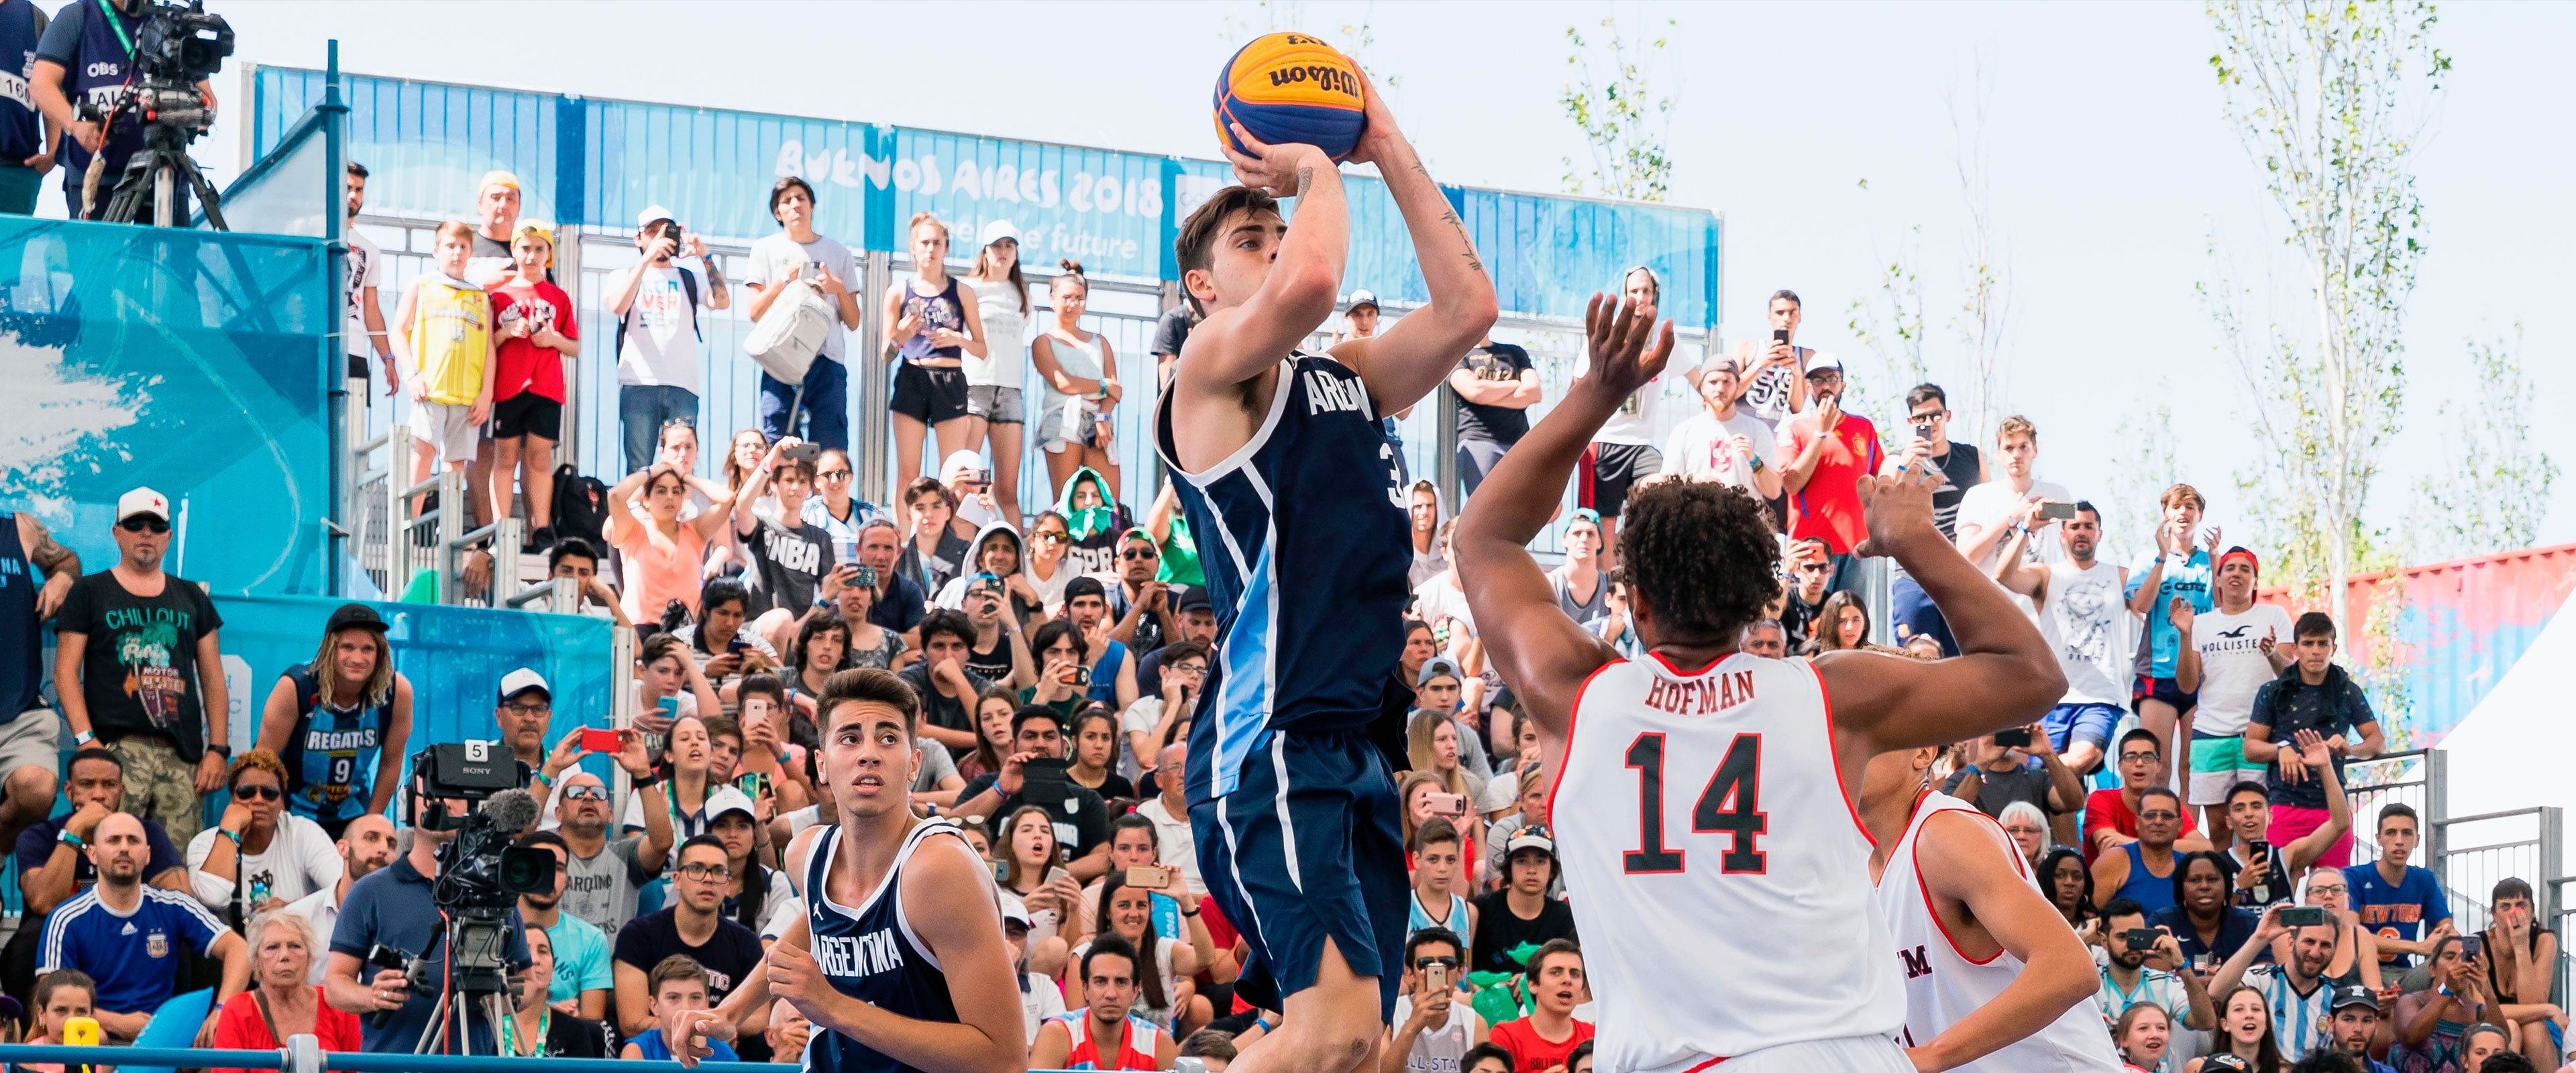 3x3 Basketball, Olympic sport, Team dynamics, Fast-paced action, 3840x1600 Dual Screen Desktop